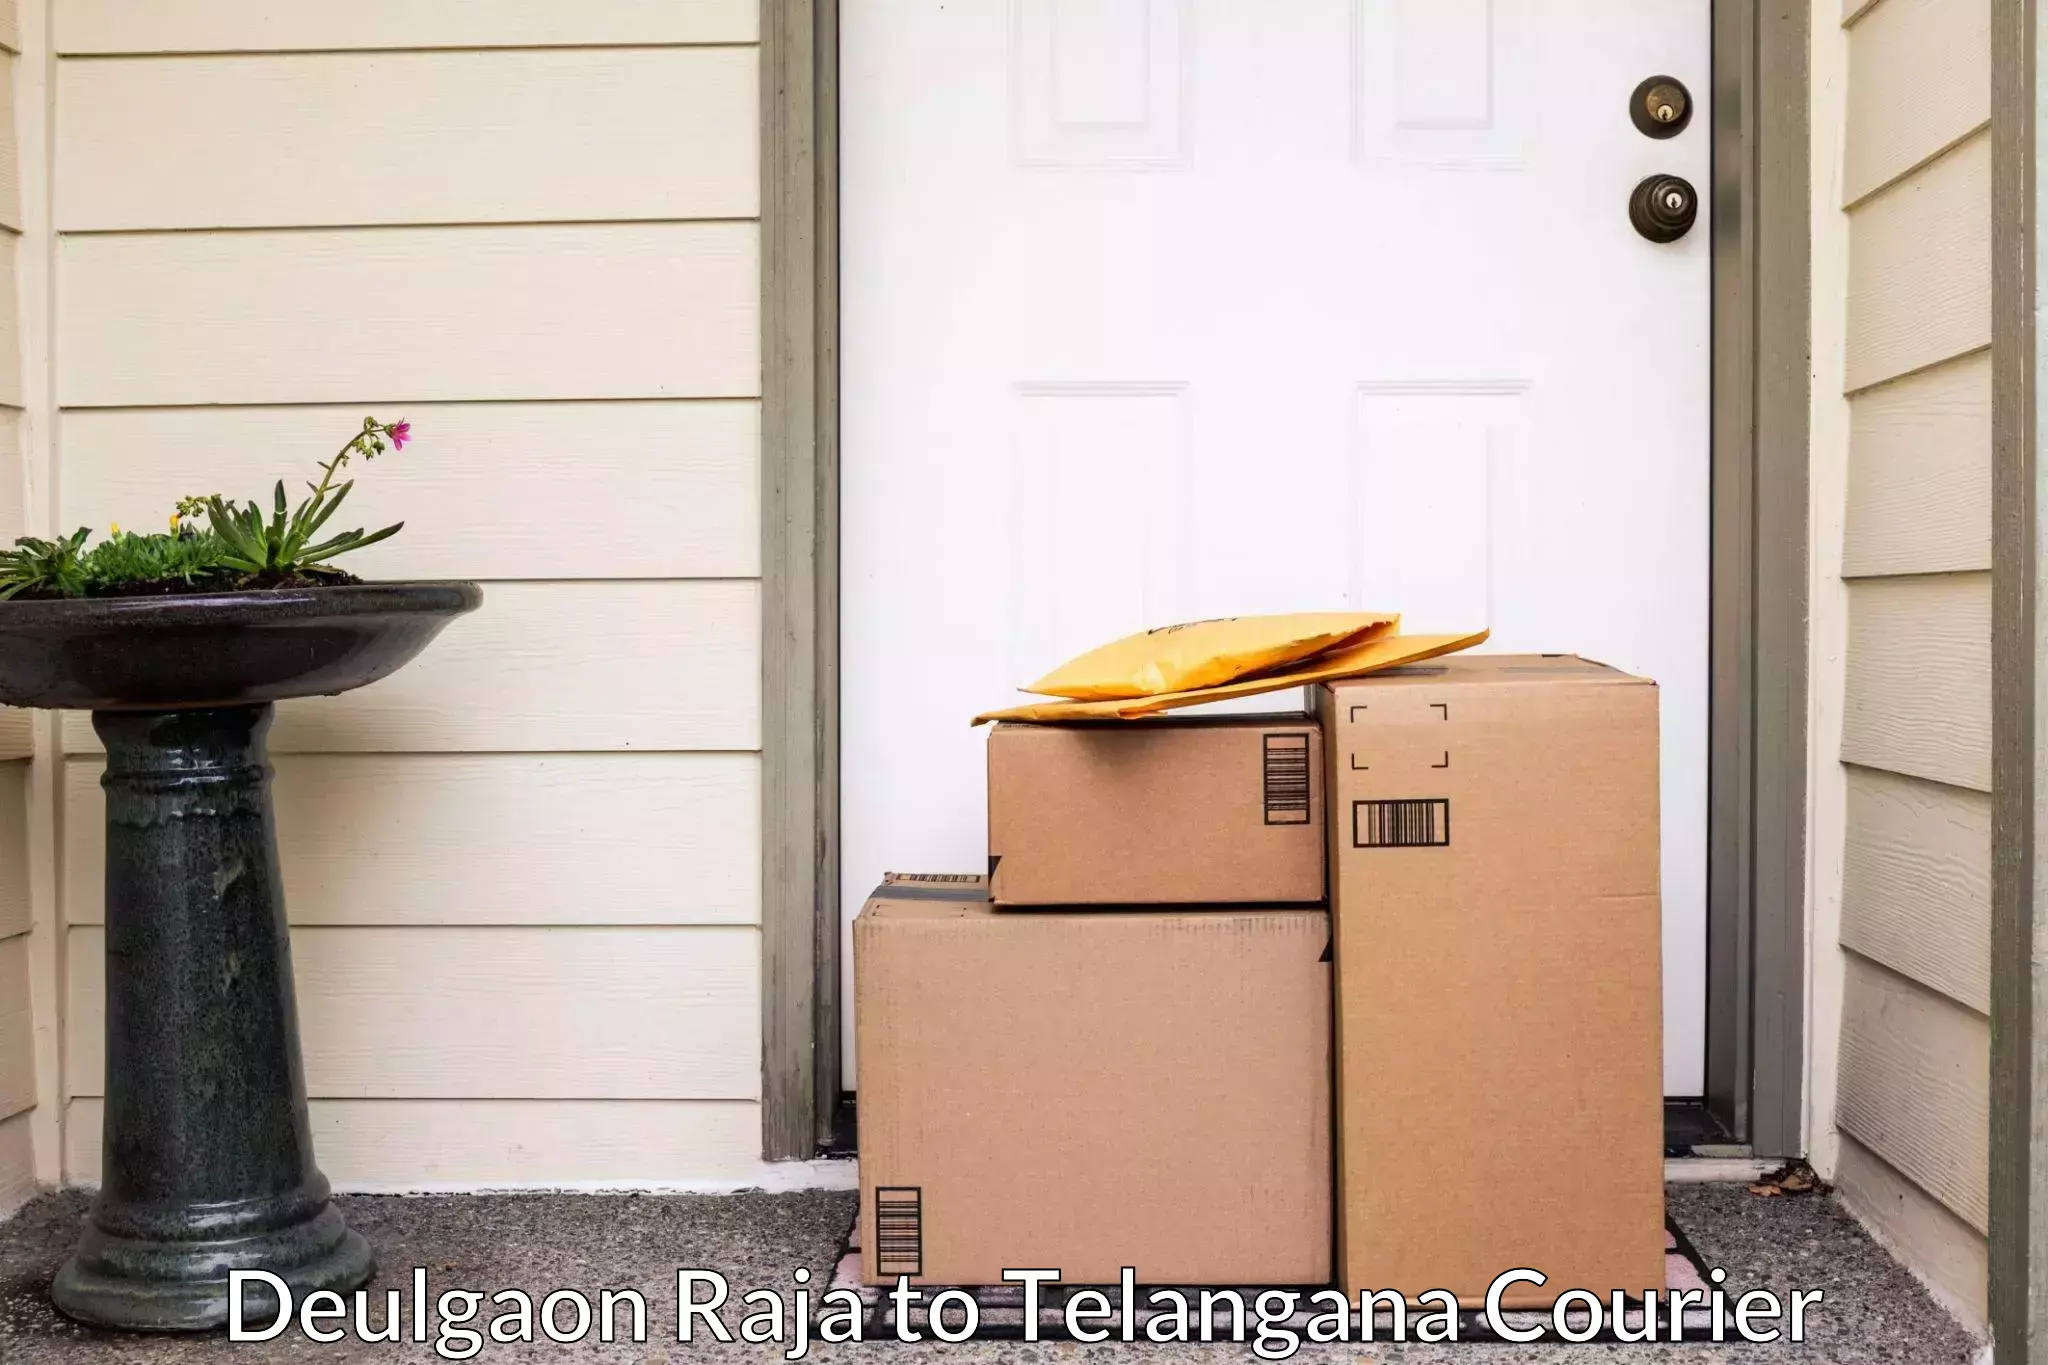 Quality relocation services Deulgaon Raja to Mancherial